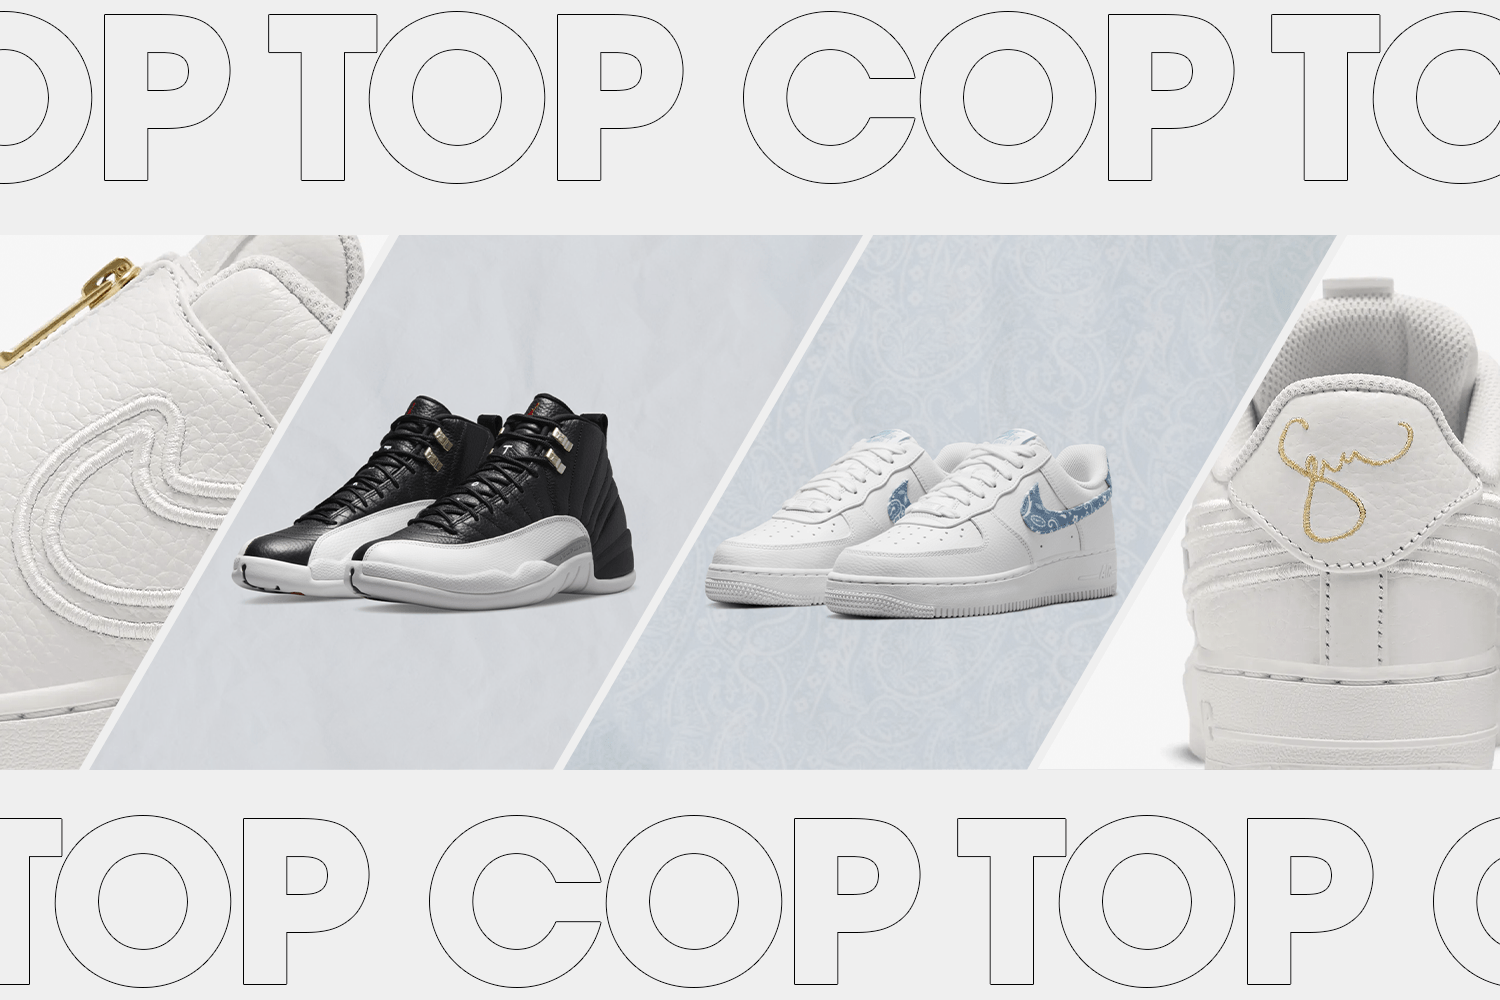 The community has voted: Your Top 3 Cop Sneaker Week 7